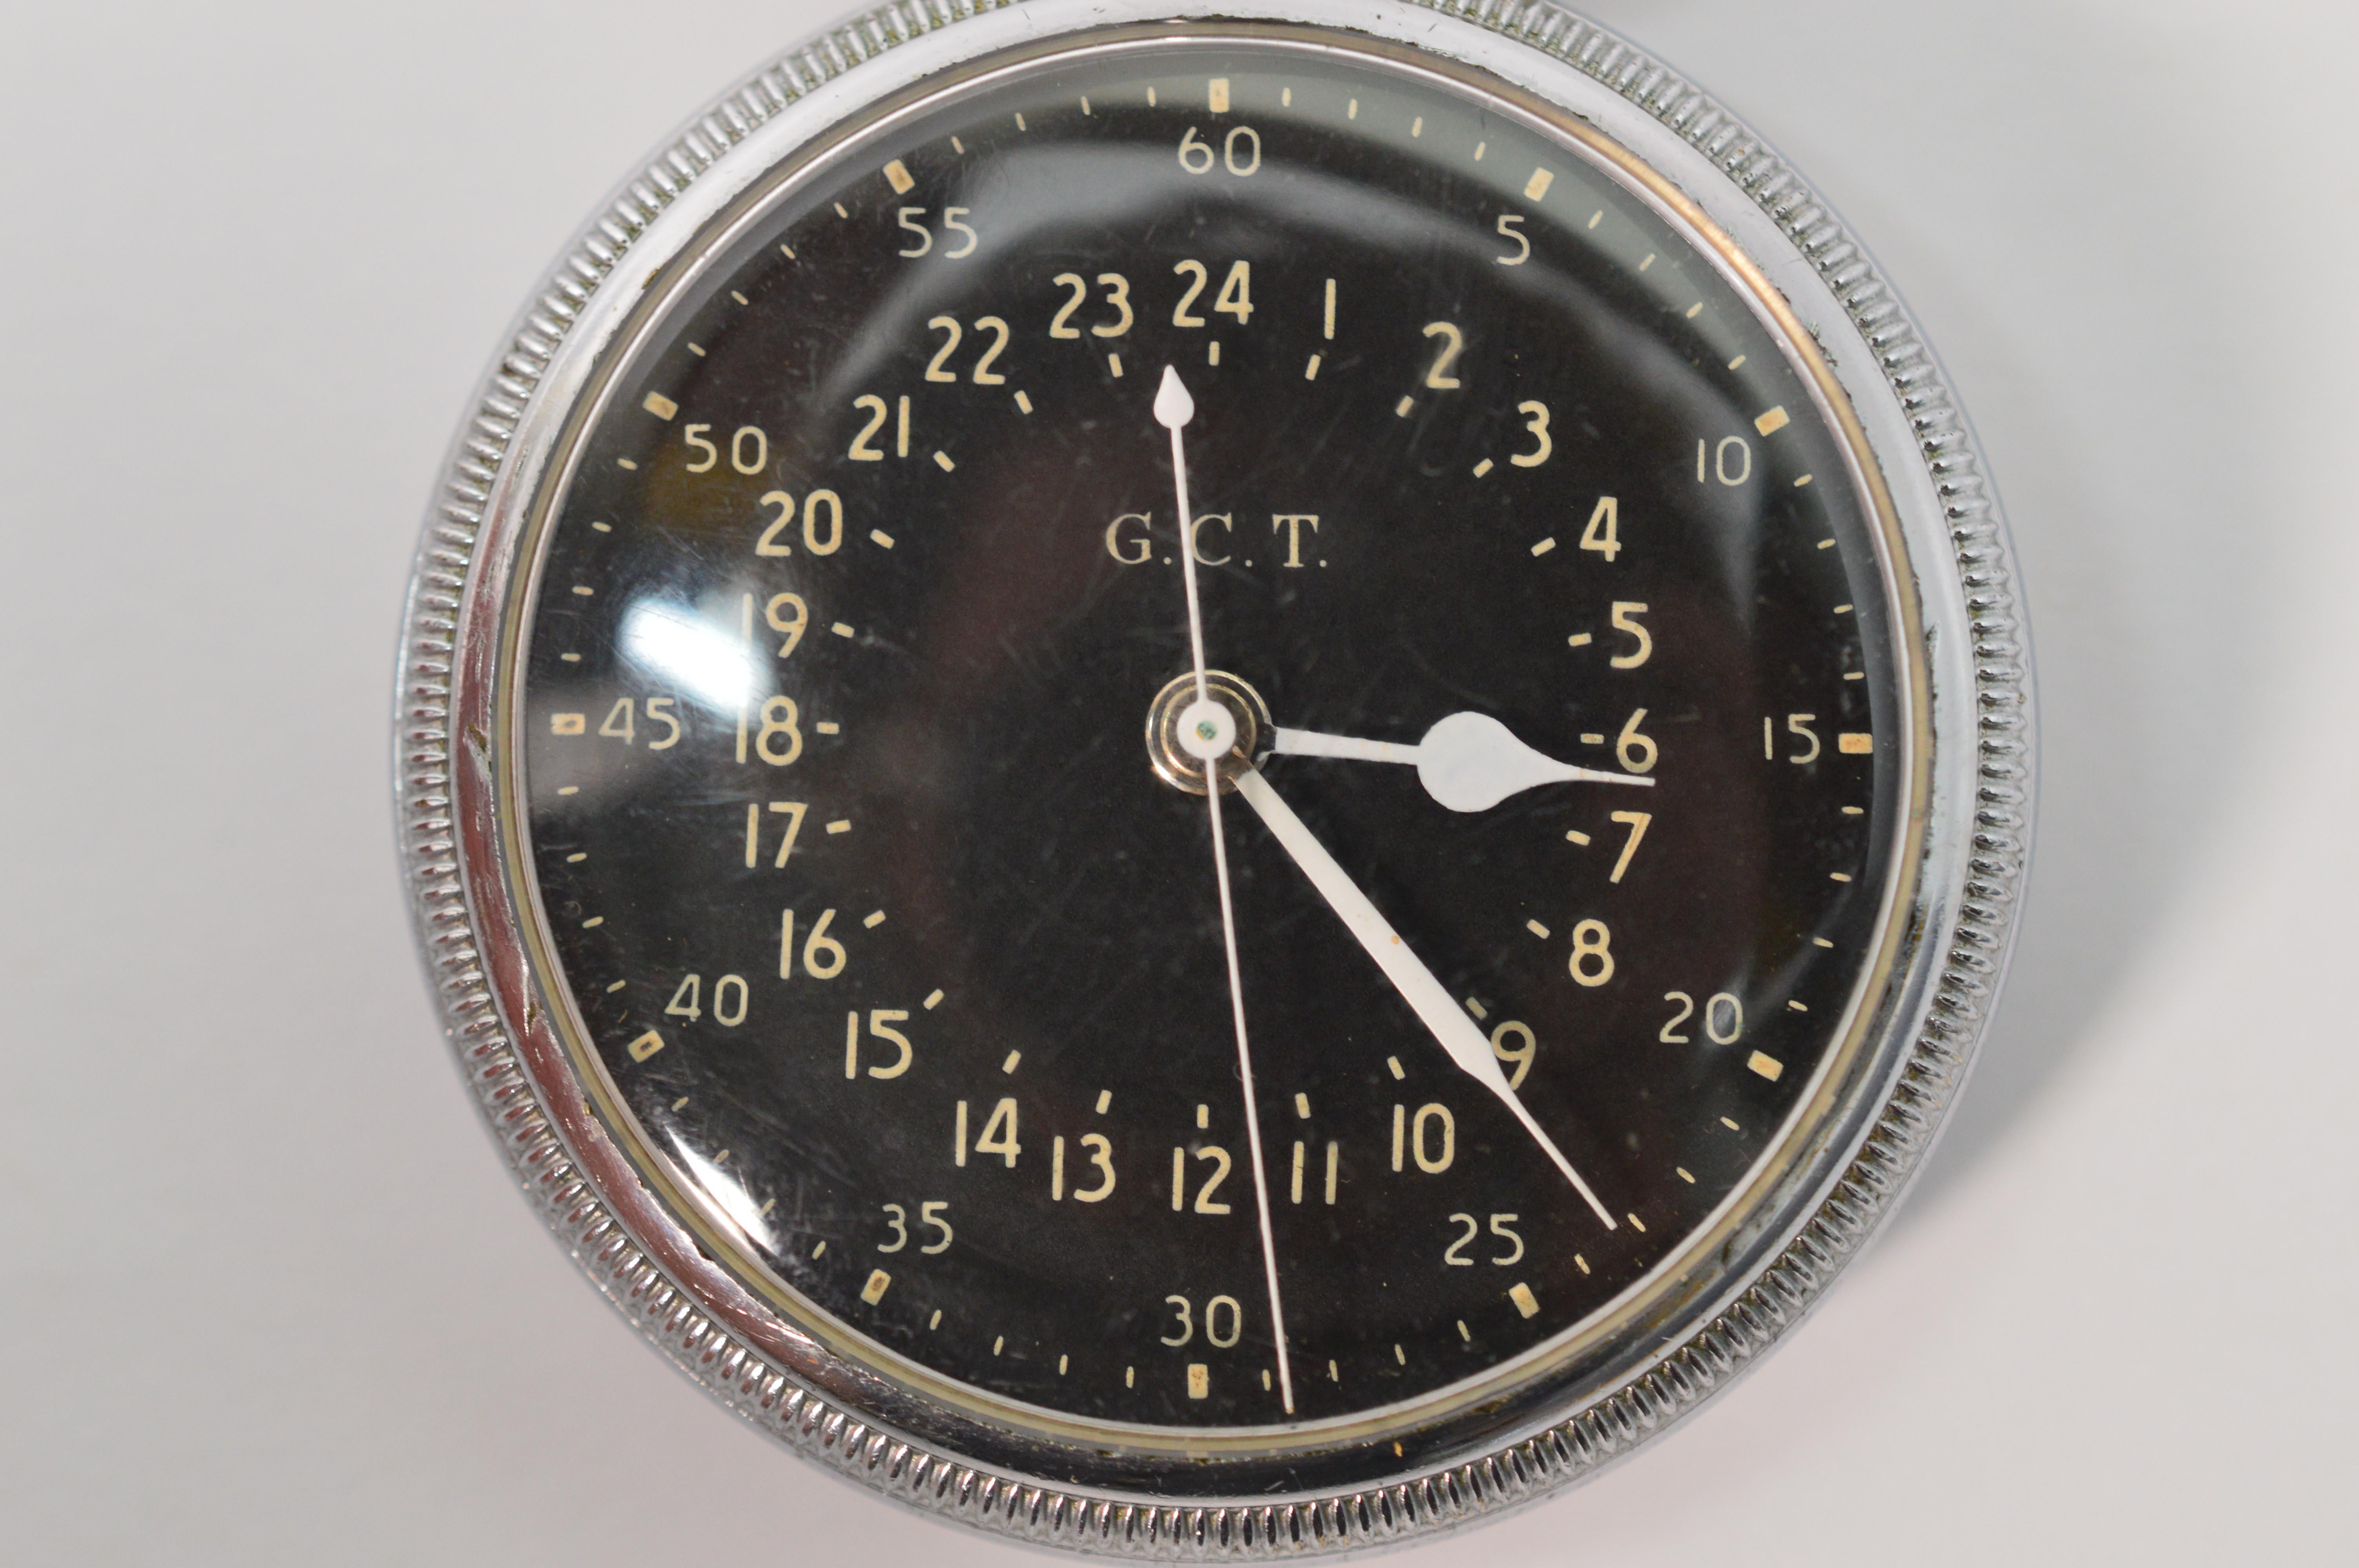 Interesting vintage timepiece and considered by many as one of the most reliable railroad grade pocket watches for the period.  Circa 1942, this American made pocket watch by Hamilton Watch Company is a hard to find, working wartime veteran piece.